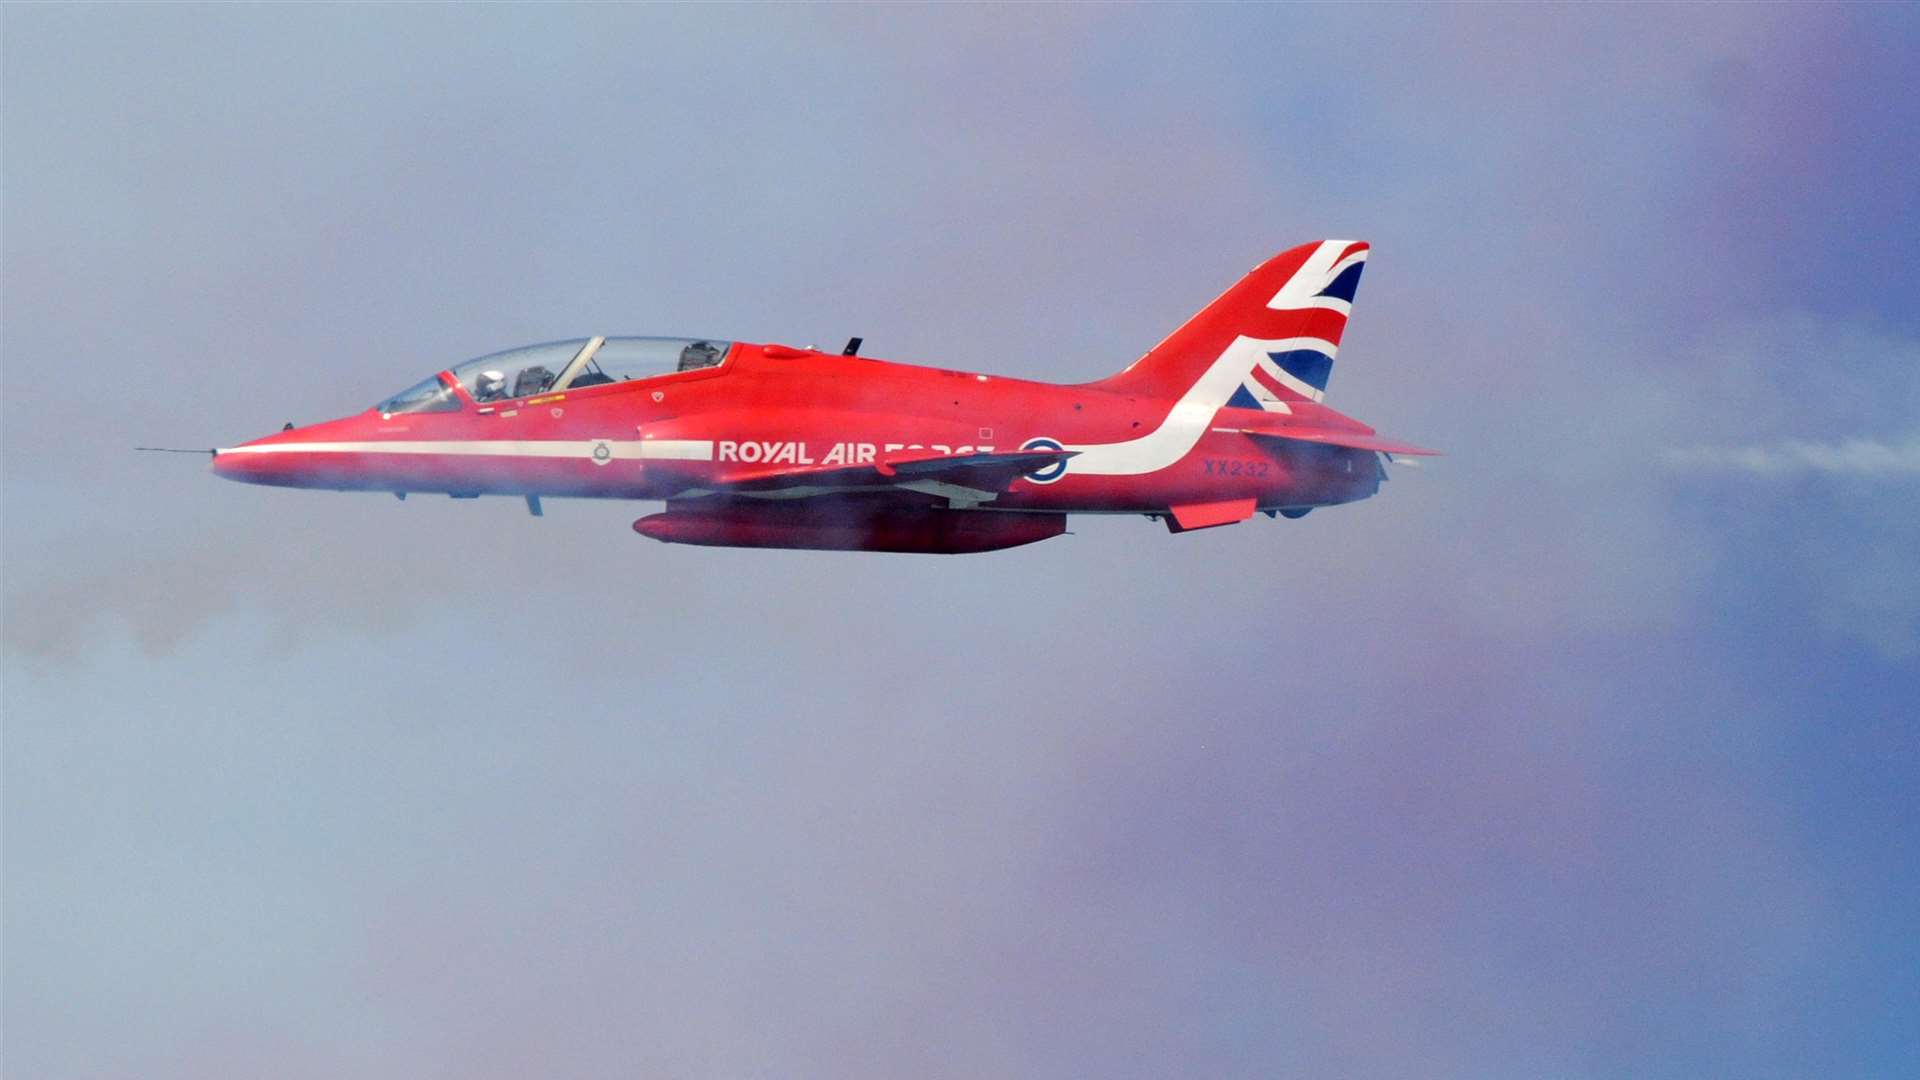 The Red Arrows will also be displaying at Biggin Hill in north Kent on the same day